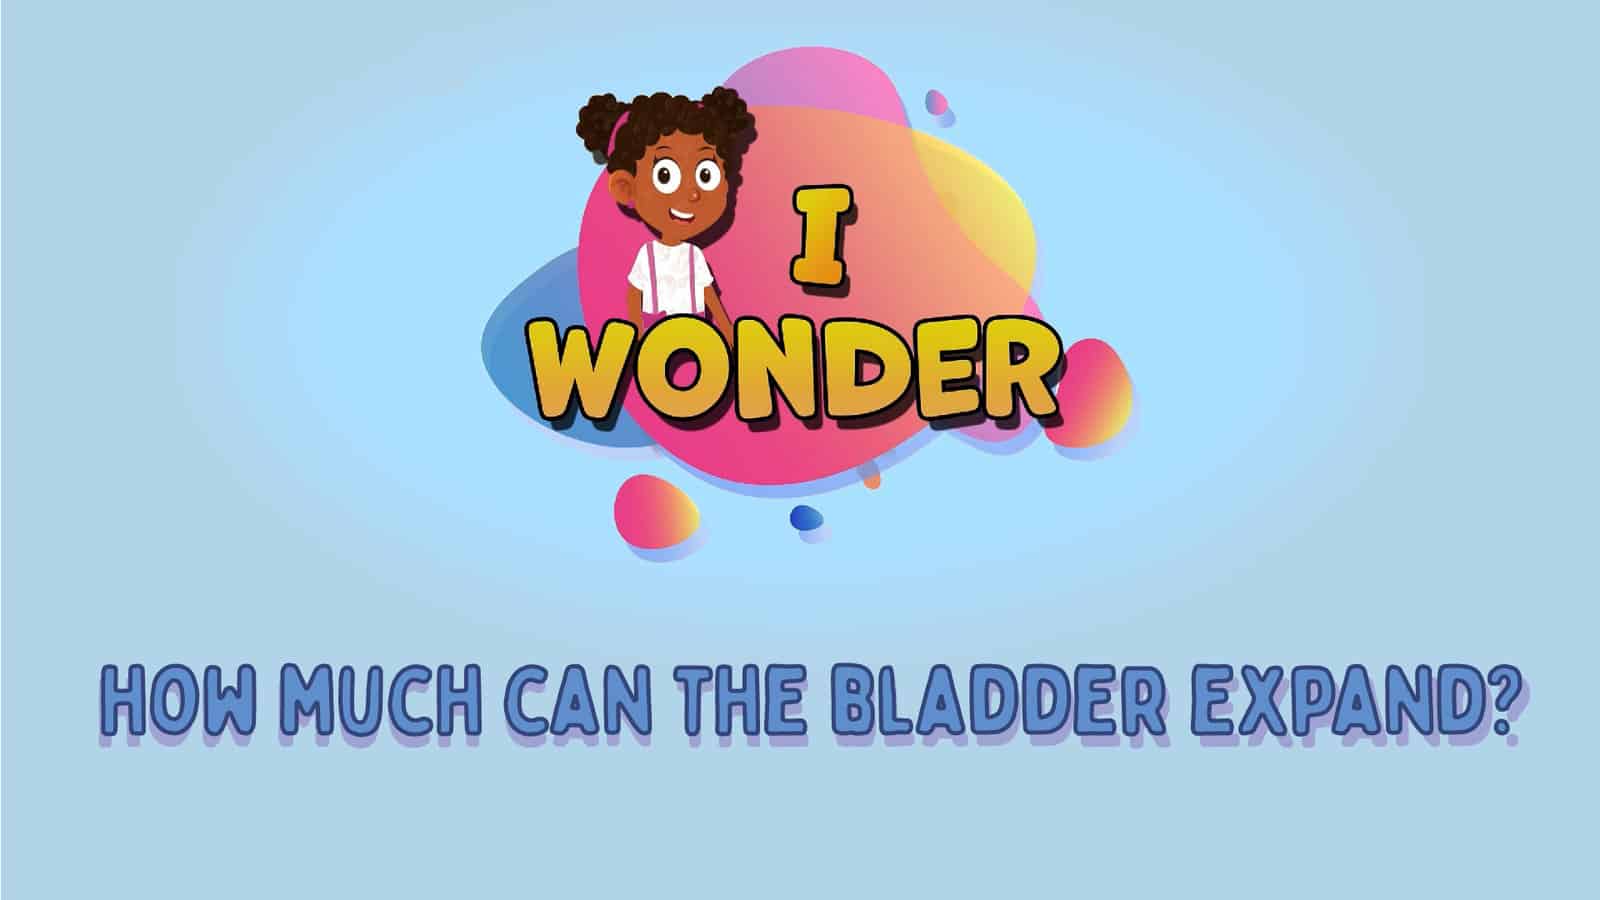 How Much Can The Bladder Expand?